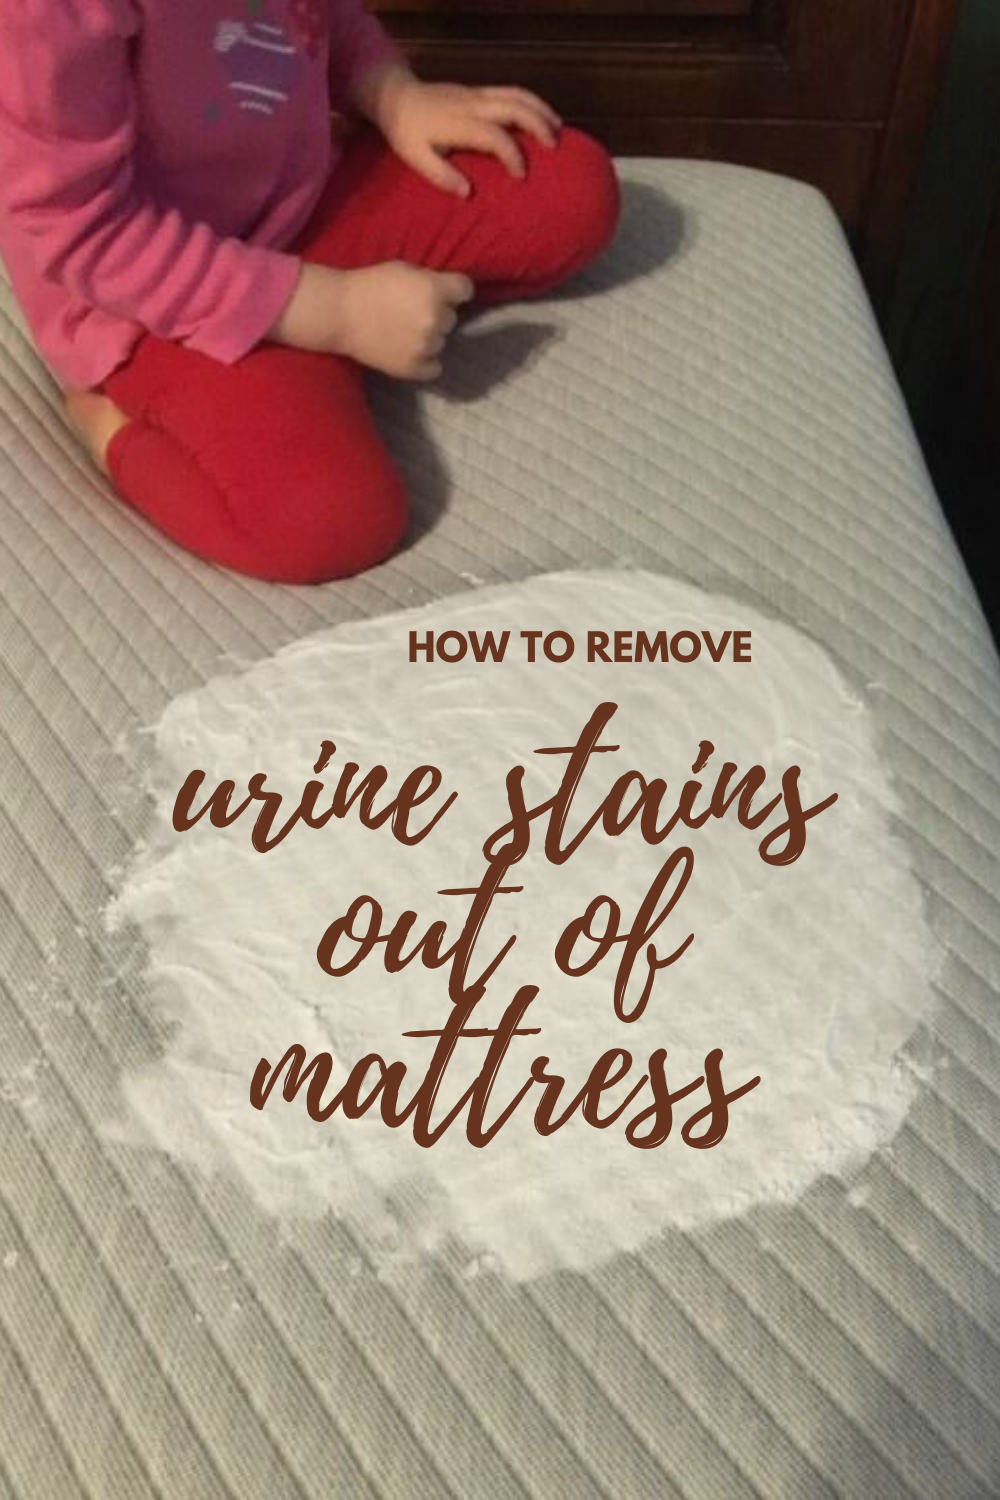 How to remove urine stains out of mattress ...